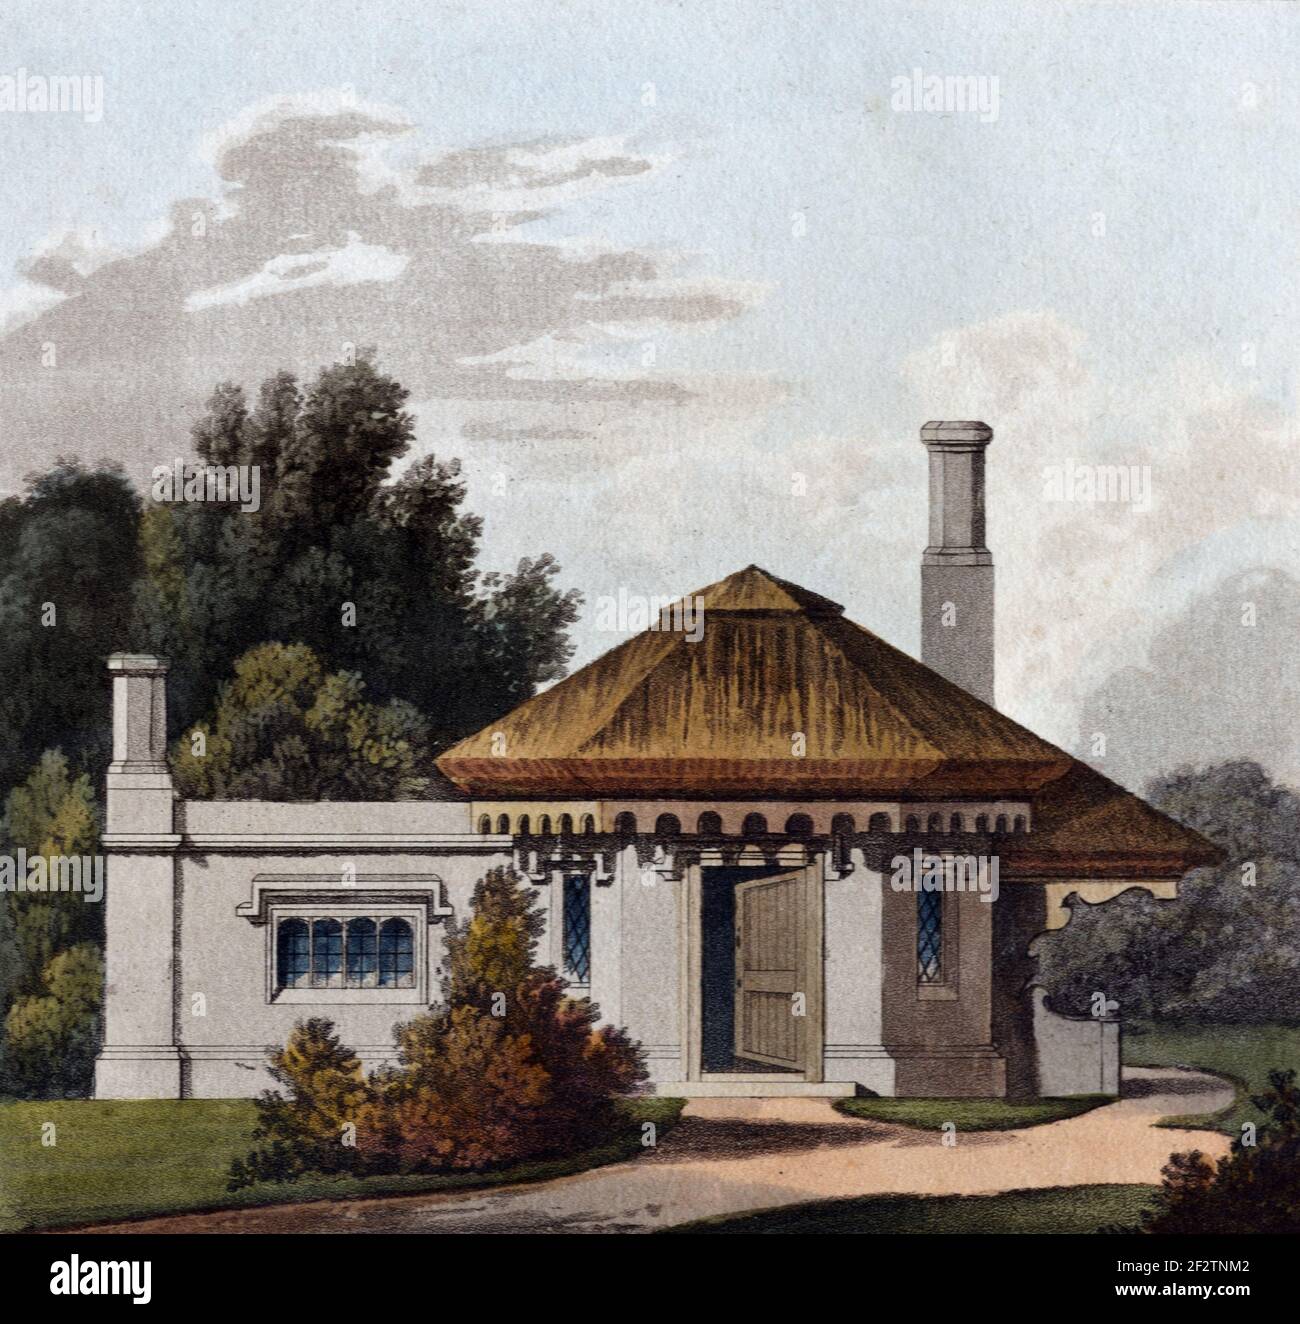 Thatched Rustic Lodge, Tiny House or Country Retreat (1827) Vintage Architectural Drawing, Aquatint or Engraving by James Thomson (1827) Stock Photo